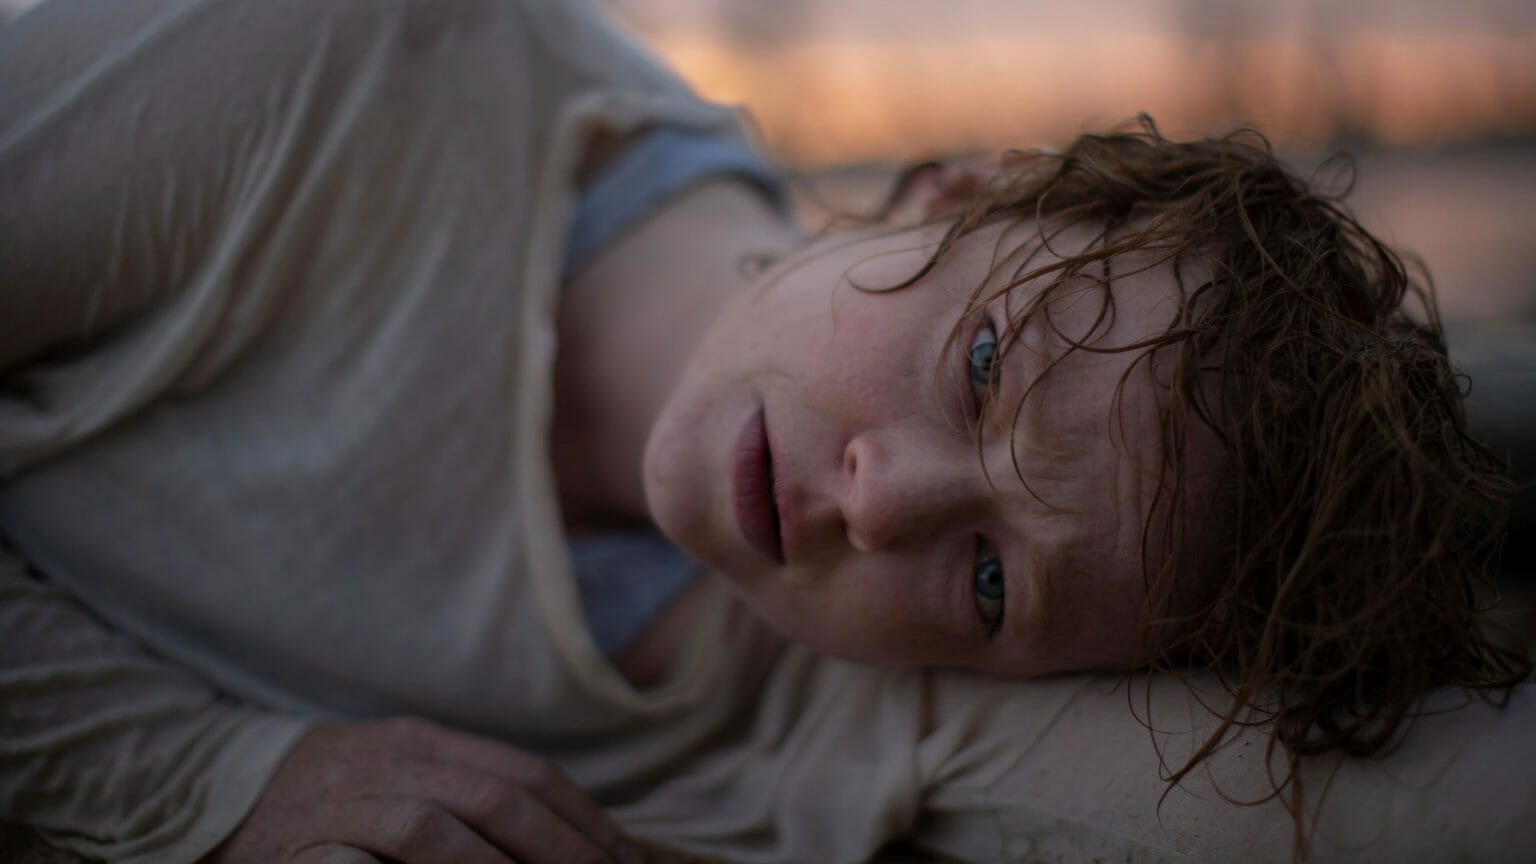 Sarah Snook lies defeated on the floor with a pale face and crazy hair in the psychological horror film from Australia RUN RABBIT RUN.